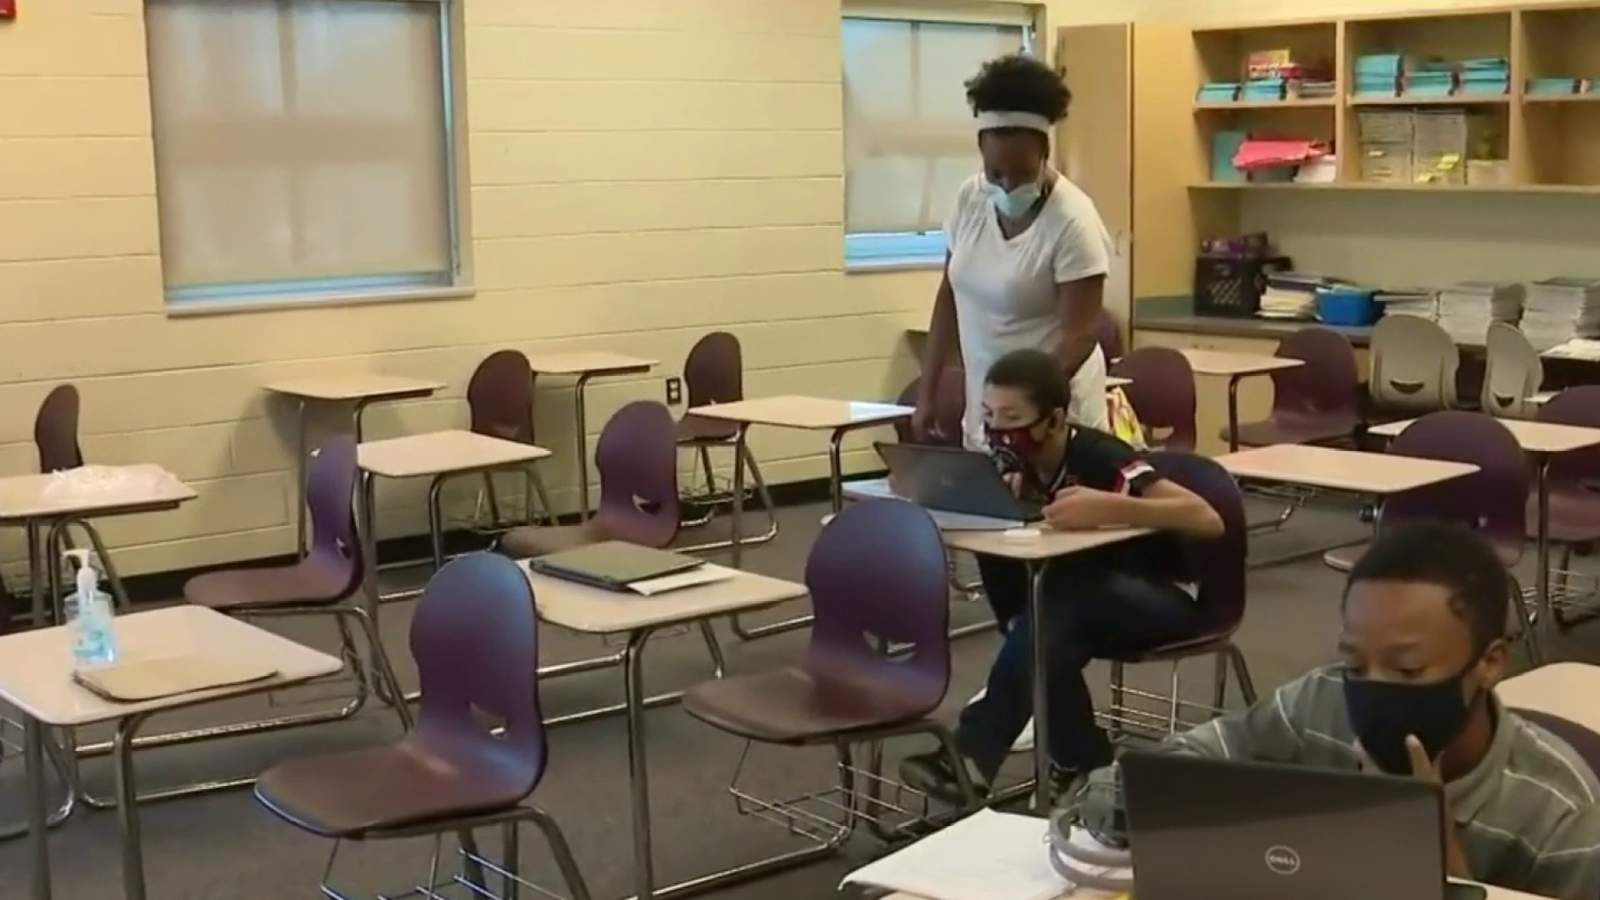 In-person learning resumes today at Detroit public schools